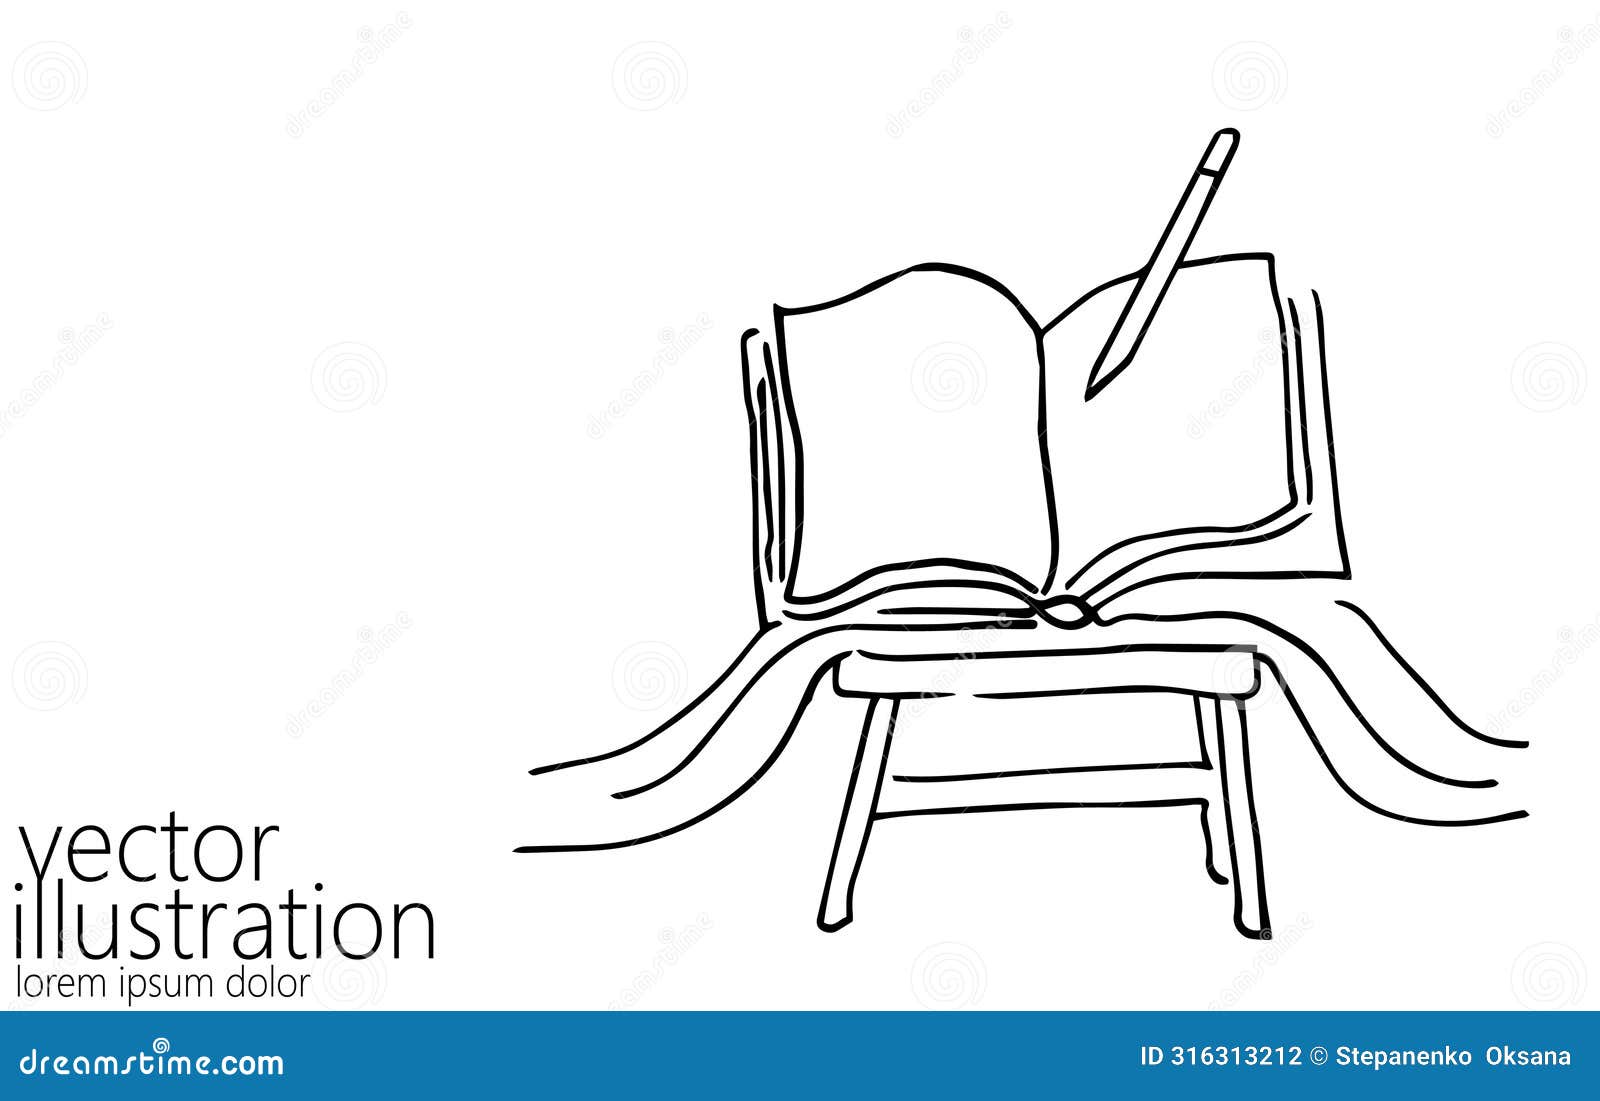 single continuous line art education book. learning apps master degree academy graduate online.  one stroke